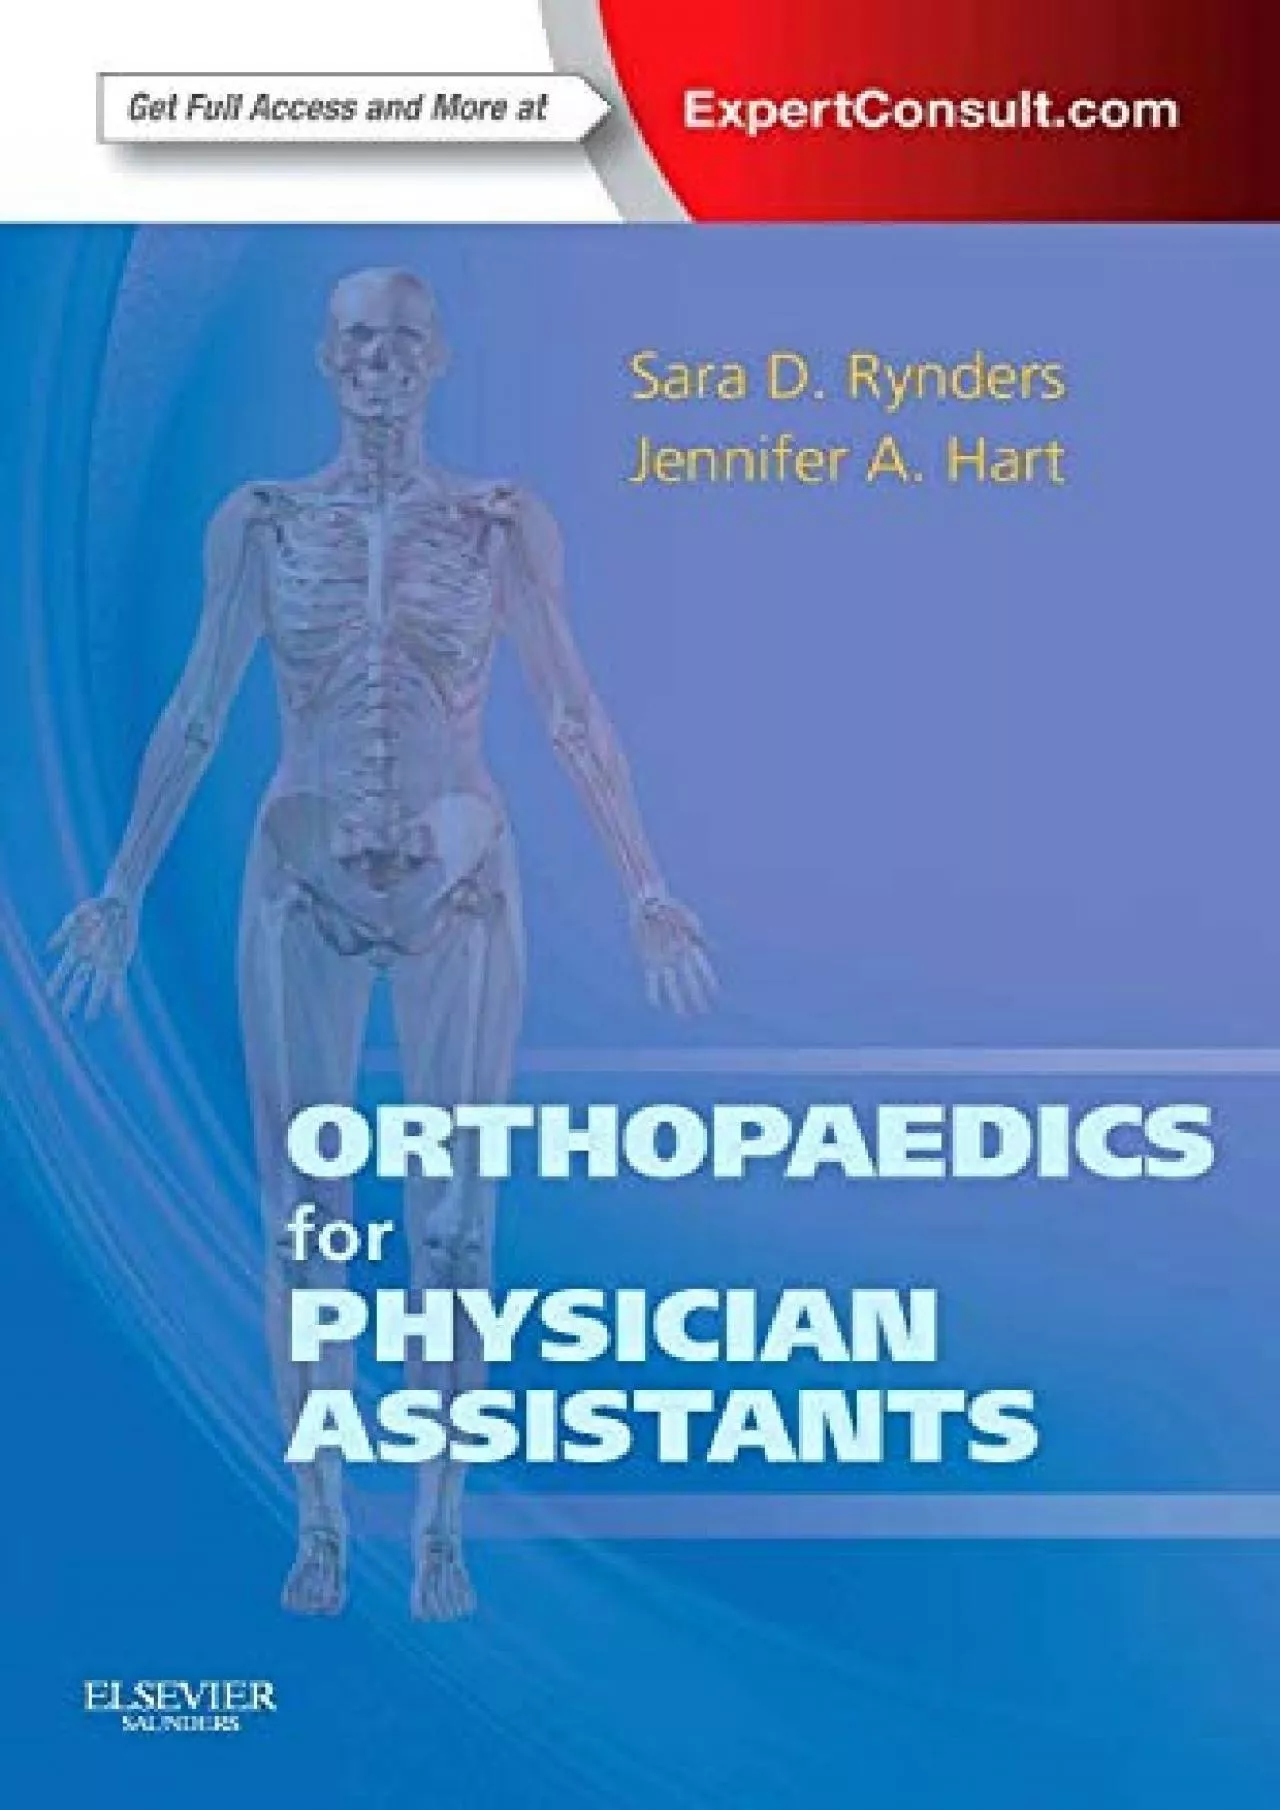 (BOOK)-Orthopaedics for Physician Assistants